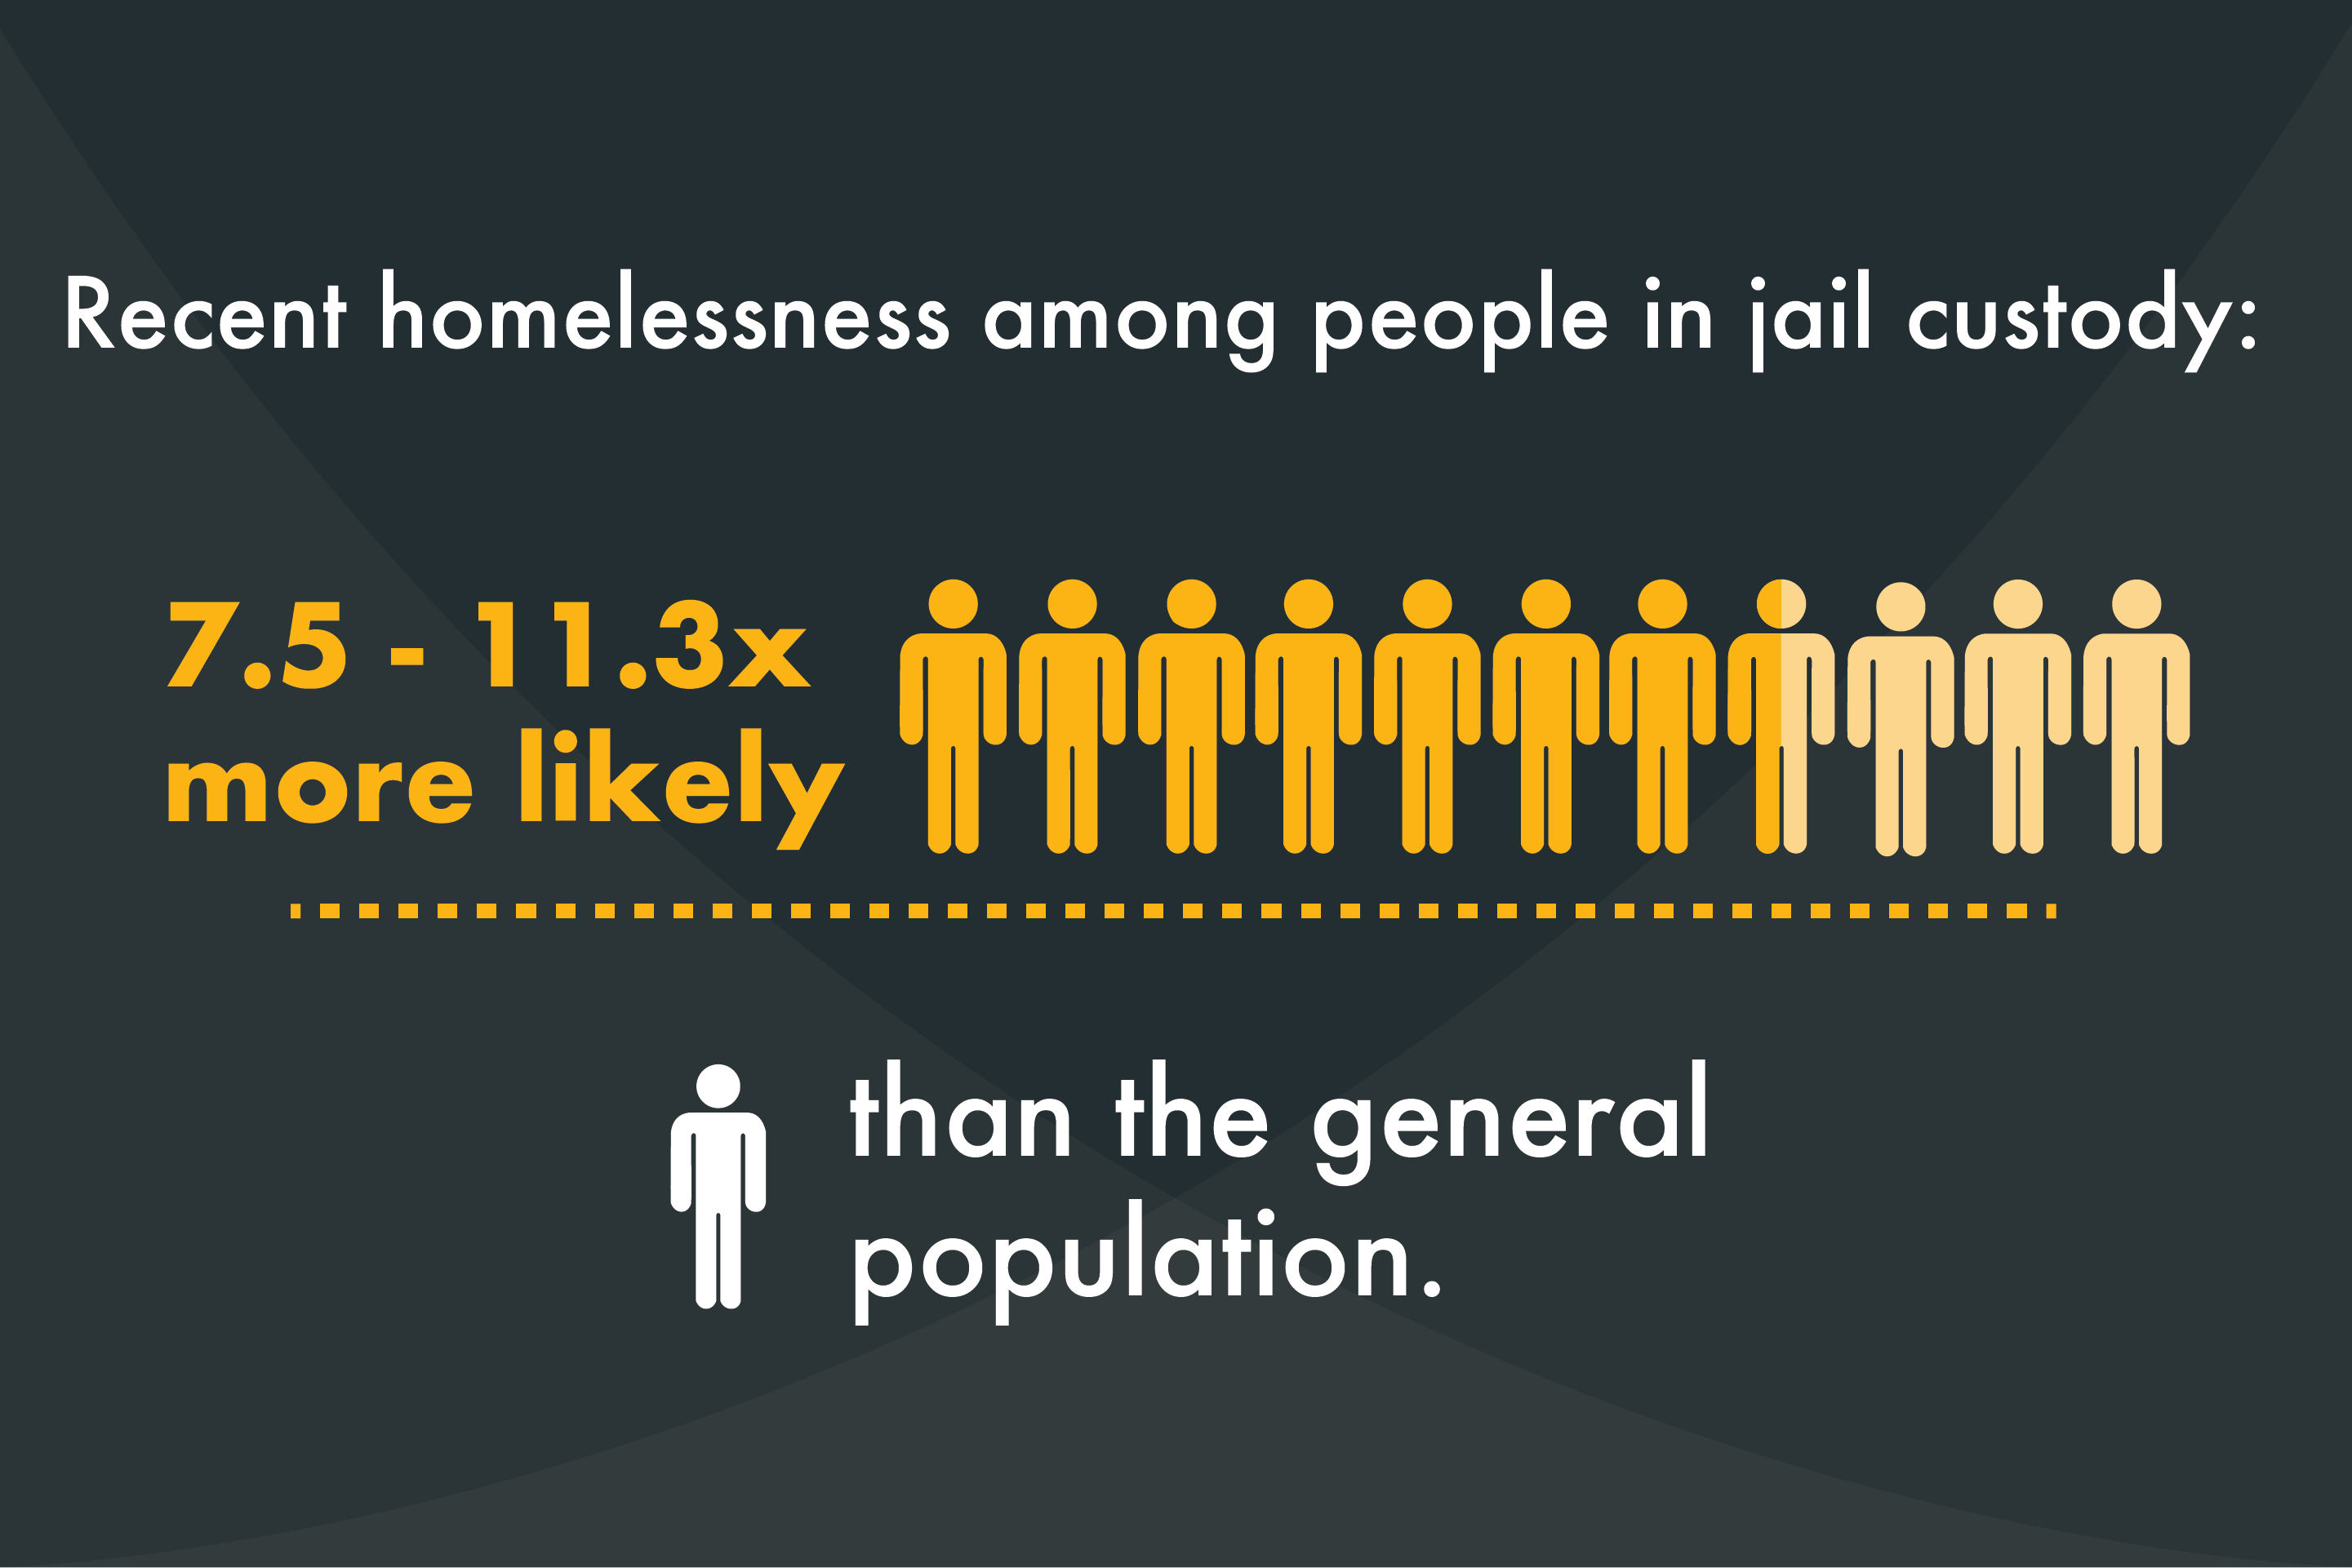 Recent homelessness among jail inmates is 7.5 - 11.3 times more likely than the general population. 